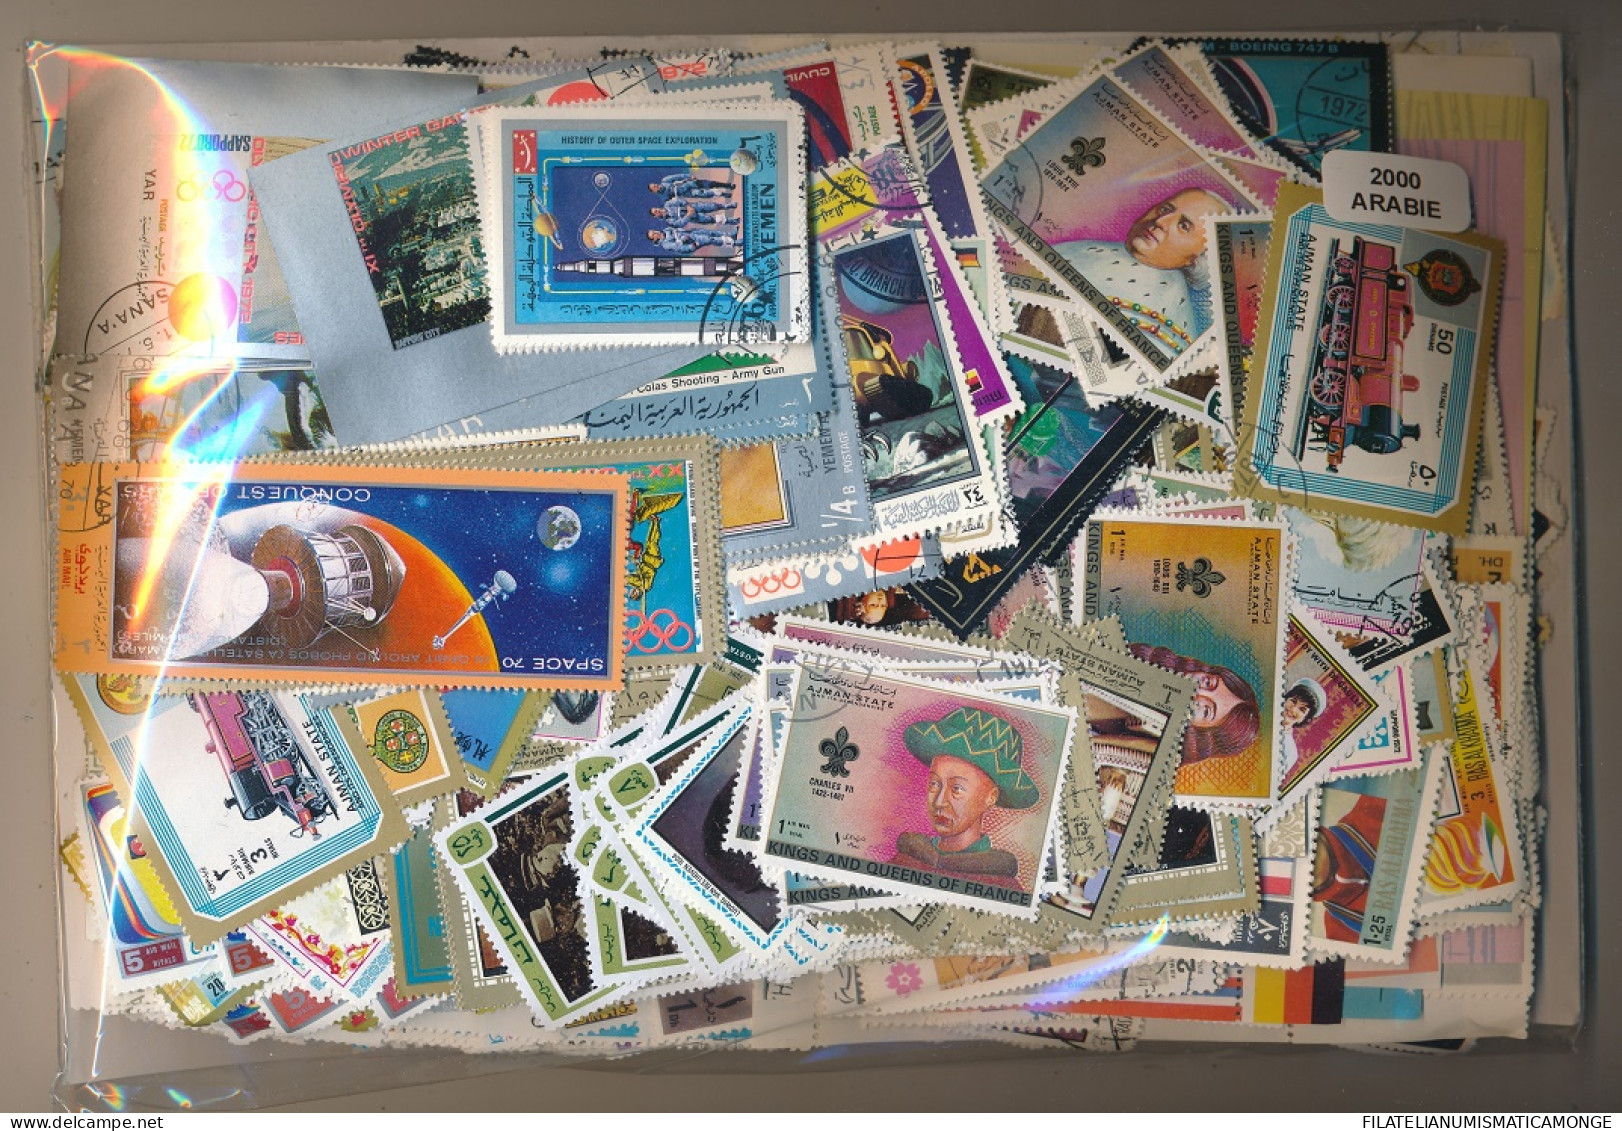  Offer - Lot Stamps - Paqueteria  Arabia 2000 Sellos Diferentes           - Lots & Kiloware (mixtures) - Min. 1000 Stamps